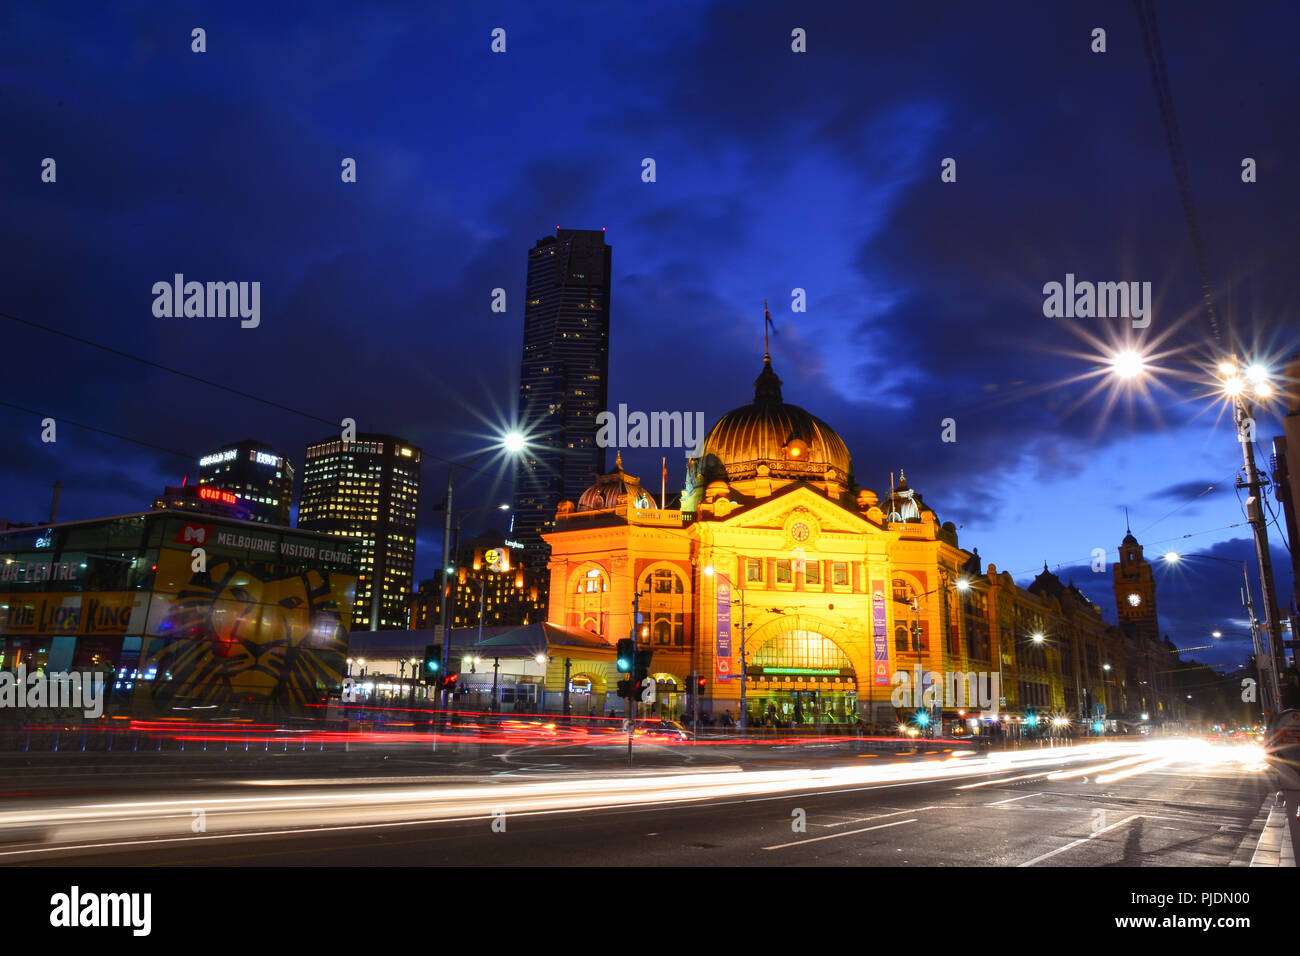 Flinders Street Station at night, the most famous landmark in Melbourne Stock Photo